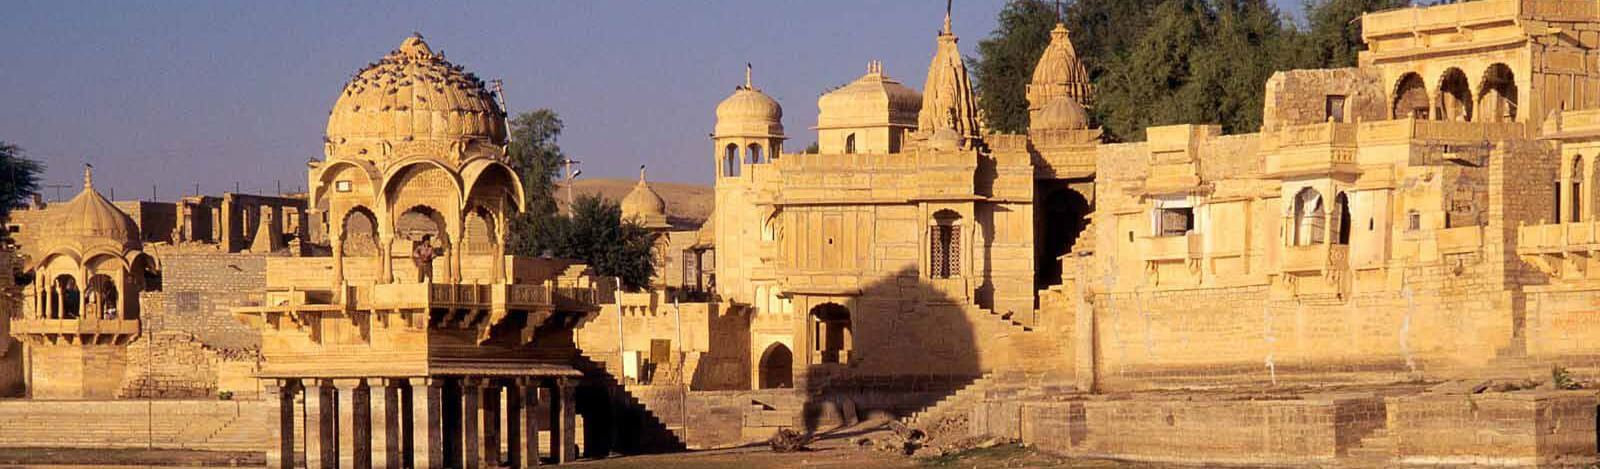 Forts & Palaces Tours of Rajasthan